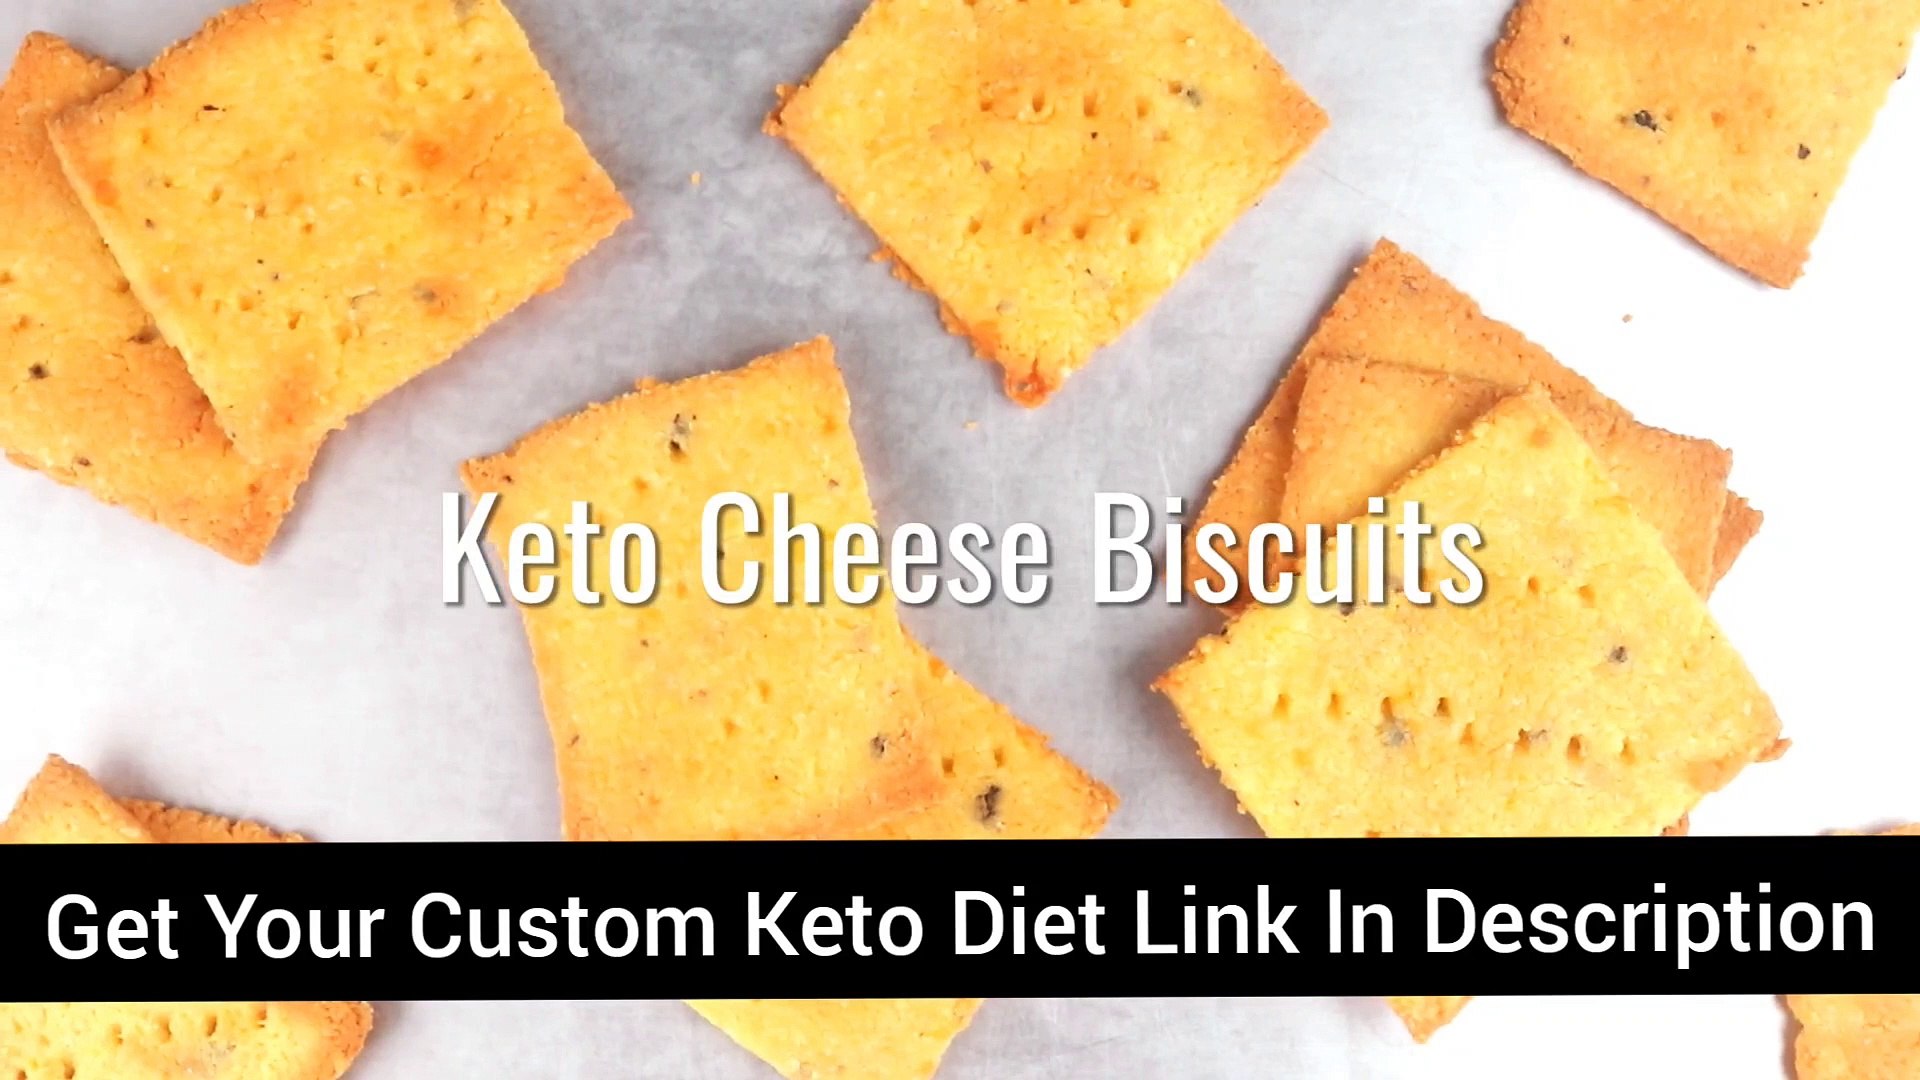 Keto Cheese Biscuits | Keto Recipes | Easy To Make Recipes | Keto Diet